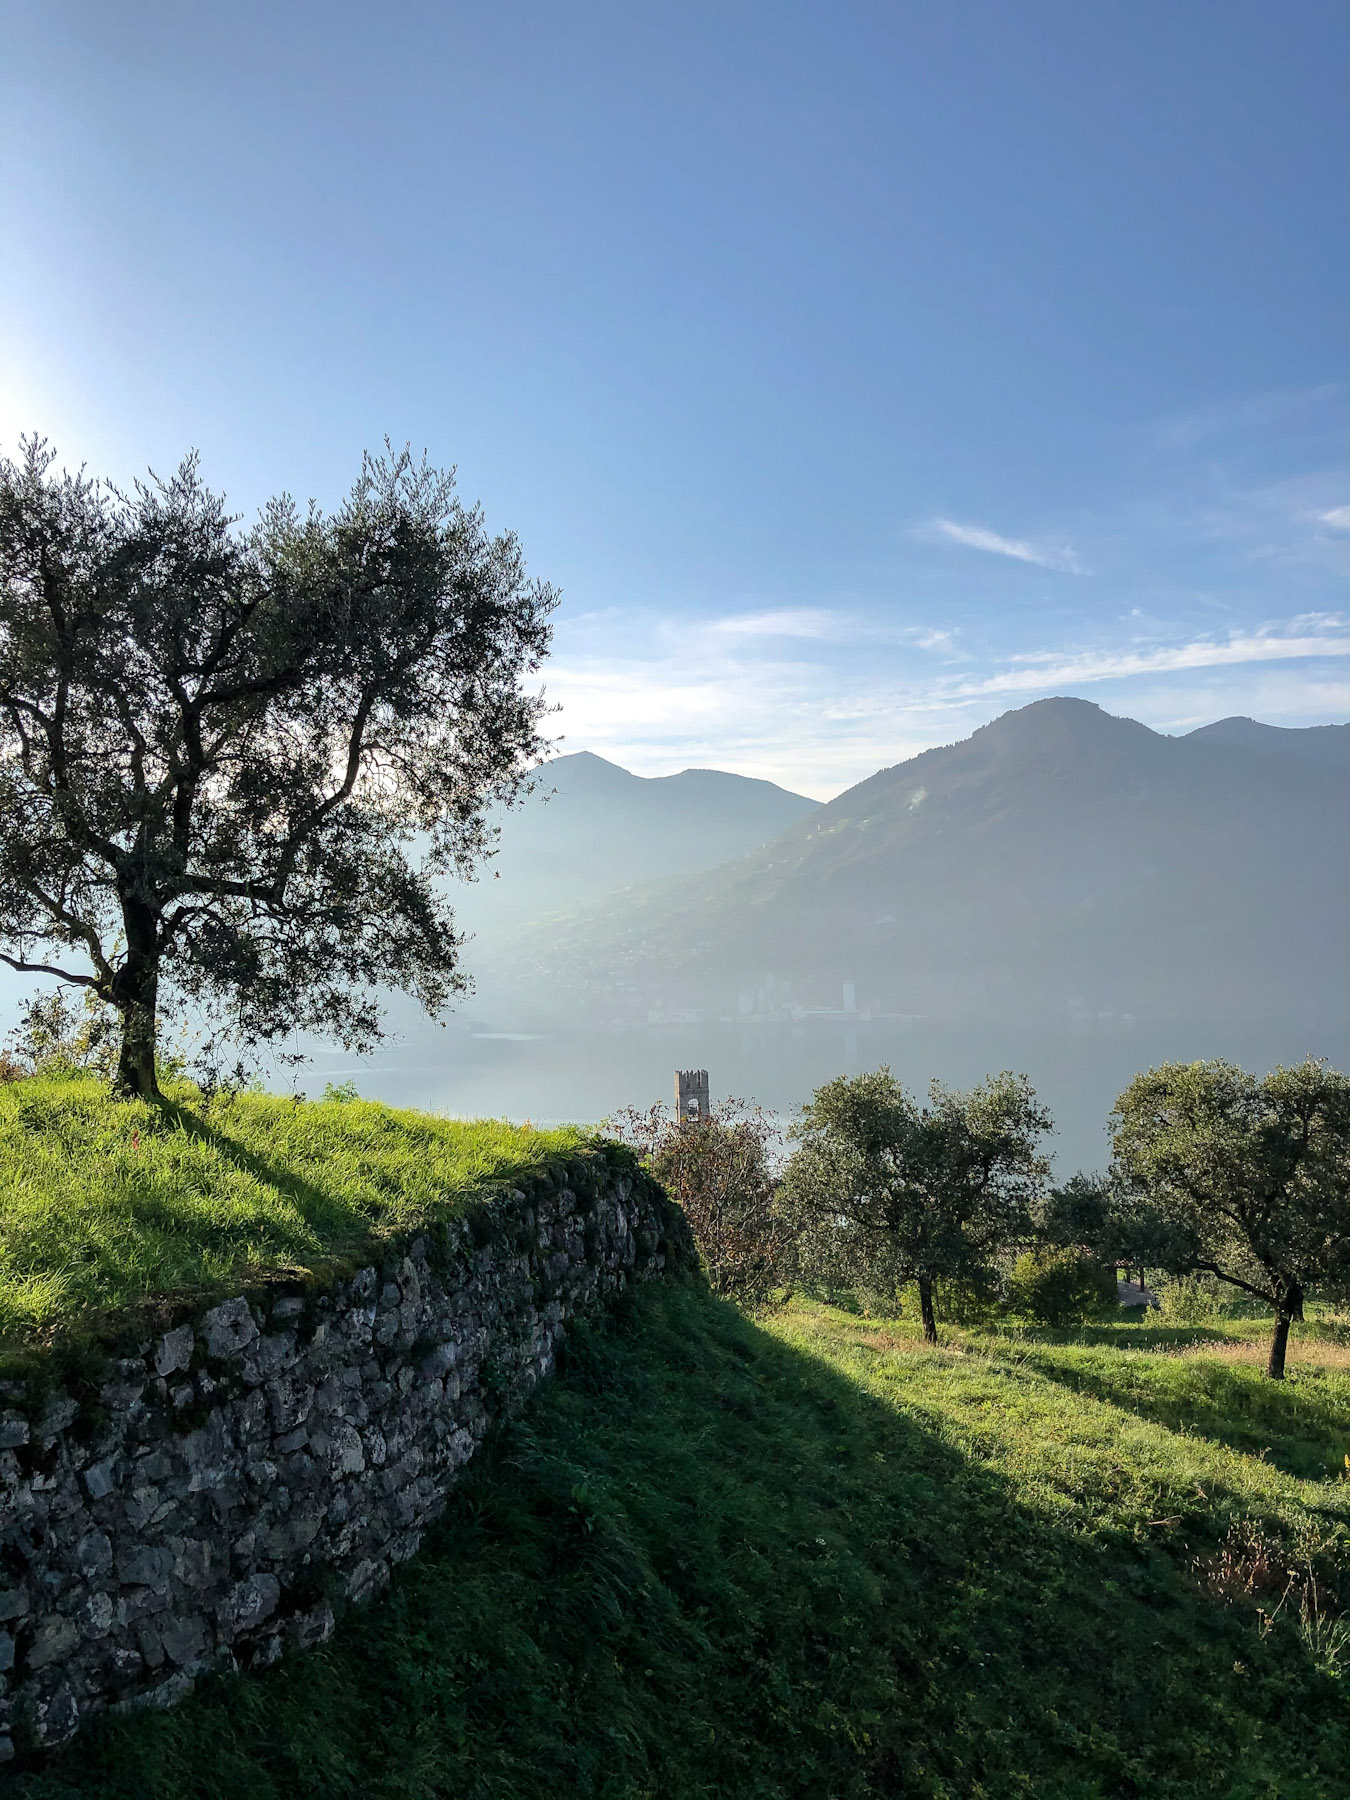 Views from the Top of Monte Isola, Lake Iseo, Italy